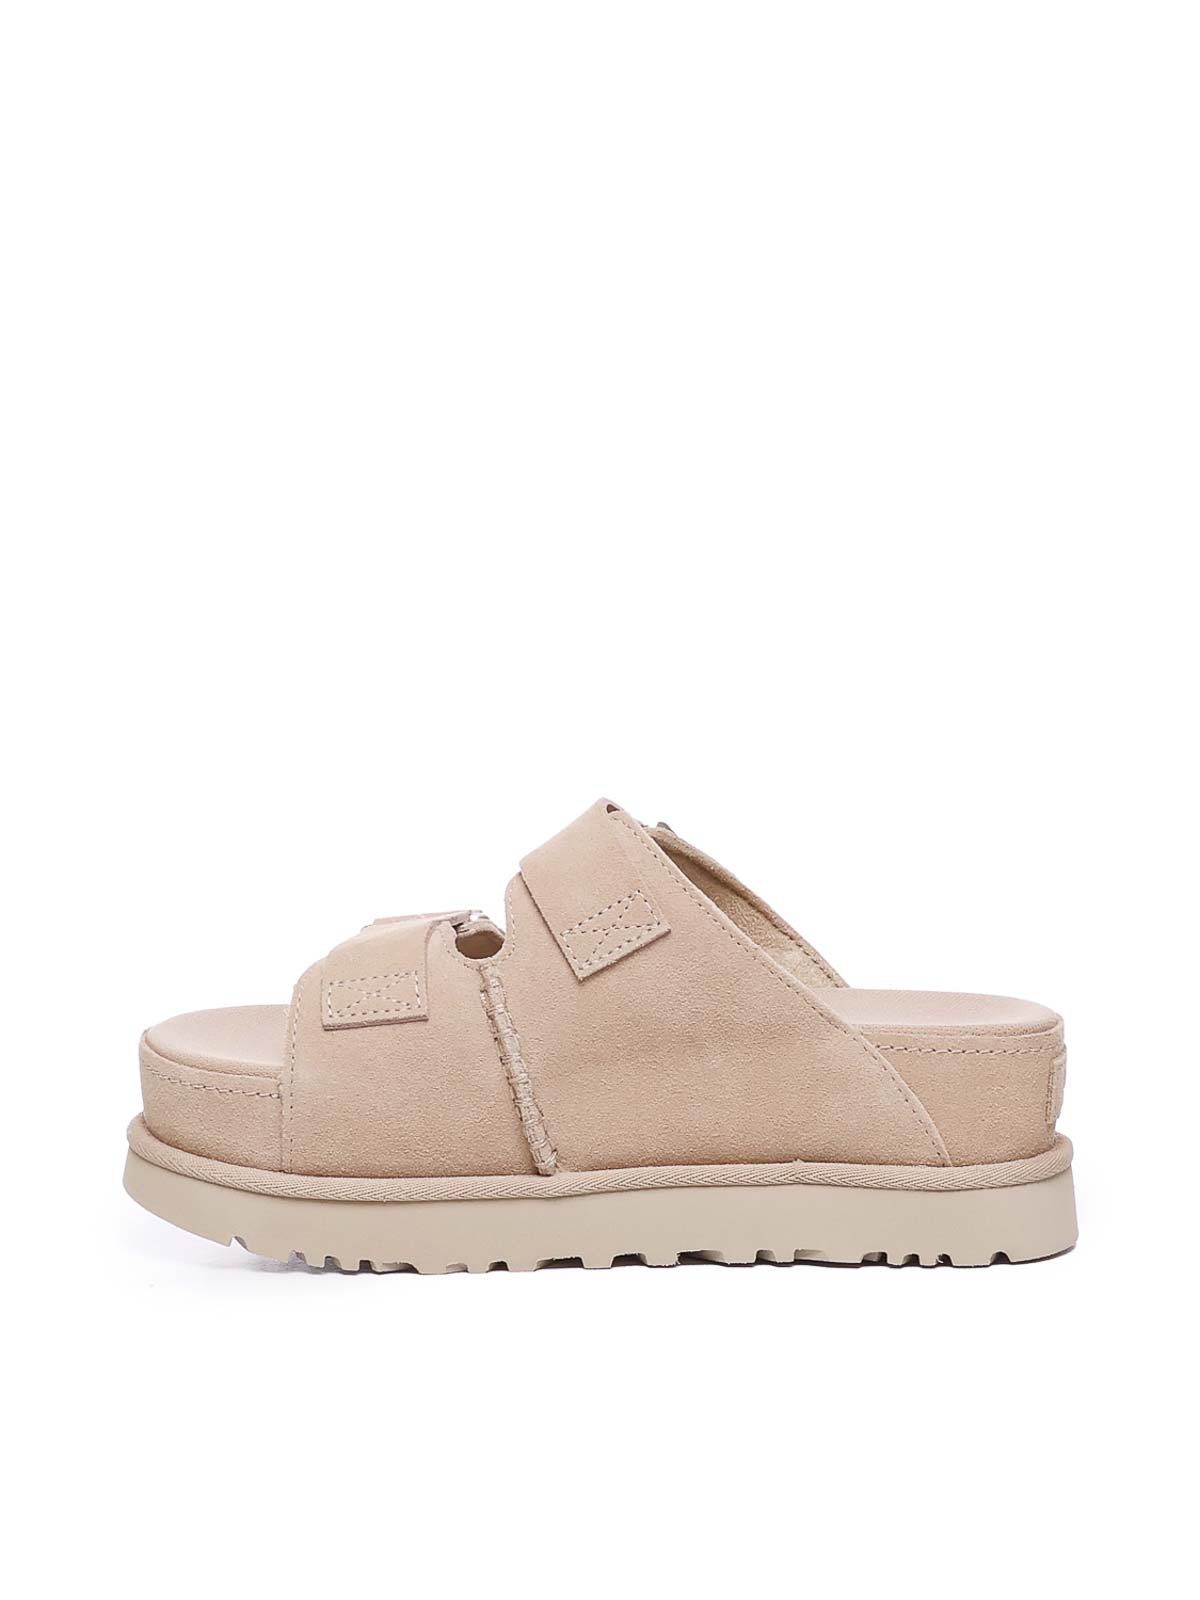 Shop Ugg Suede Sandals With Buckles In Color Carne Y Neutral